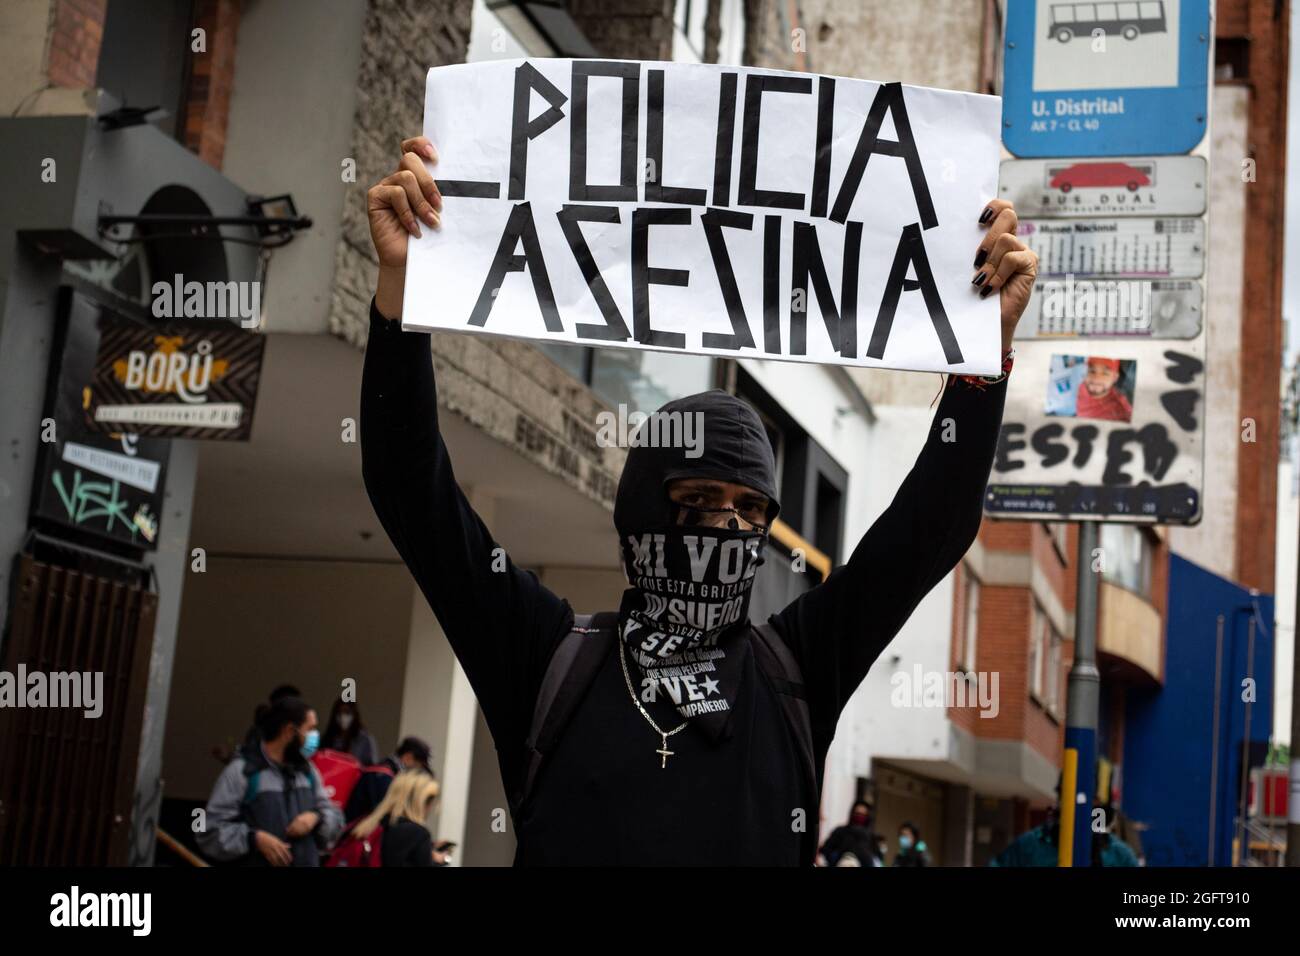 A demonstrator rises a banner that reads 'Killer Police' during a rally organized by students of the Universidad Distrital, after a few days back Esteban Mosquera, a social leader and community member was killed two years after loosing his eye on a police brutality case, in Bogota, Colombia on August 26, 2021. Stock Photo